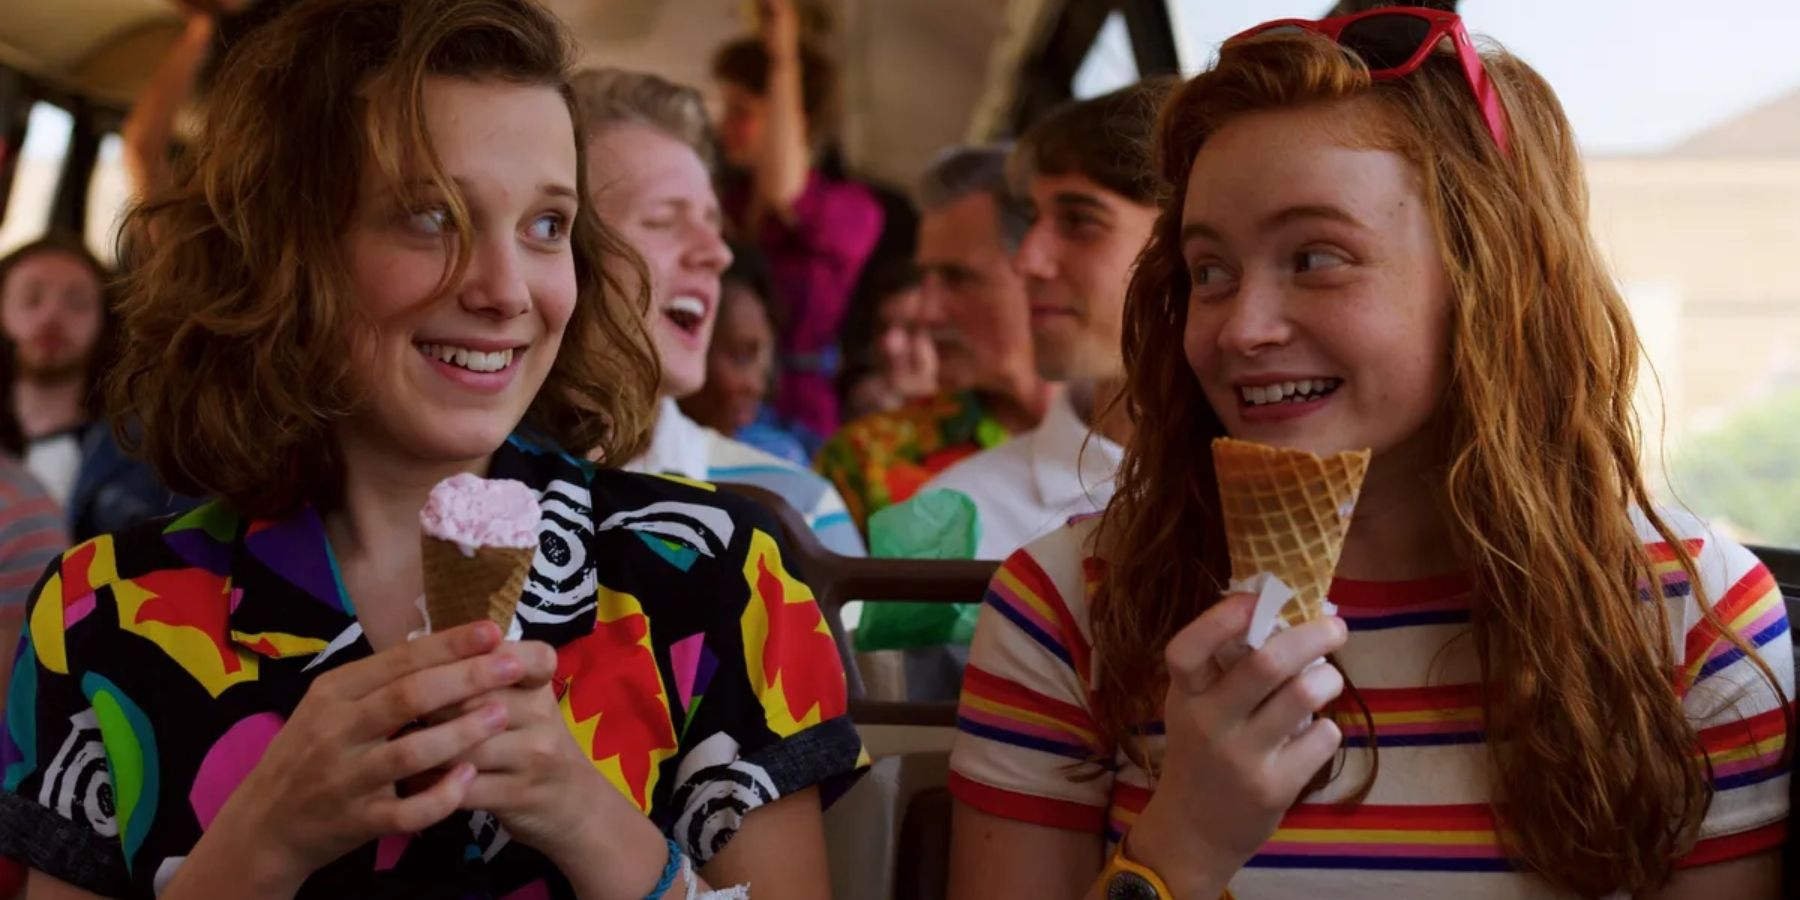 Eleven (Millie Bobby Brown) and Max (Sadie Sink) holding ice cream cones in Stranger Things